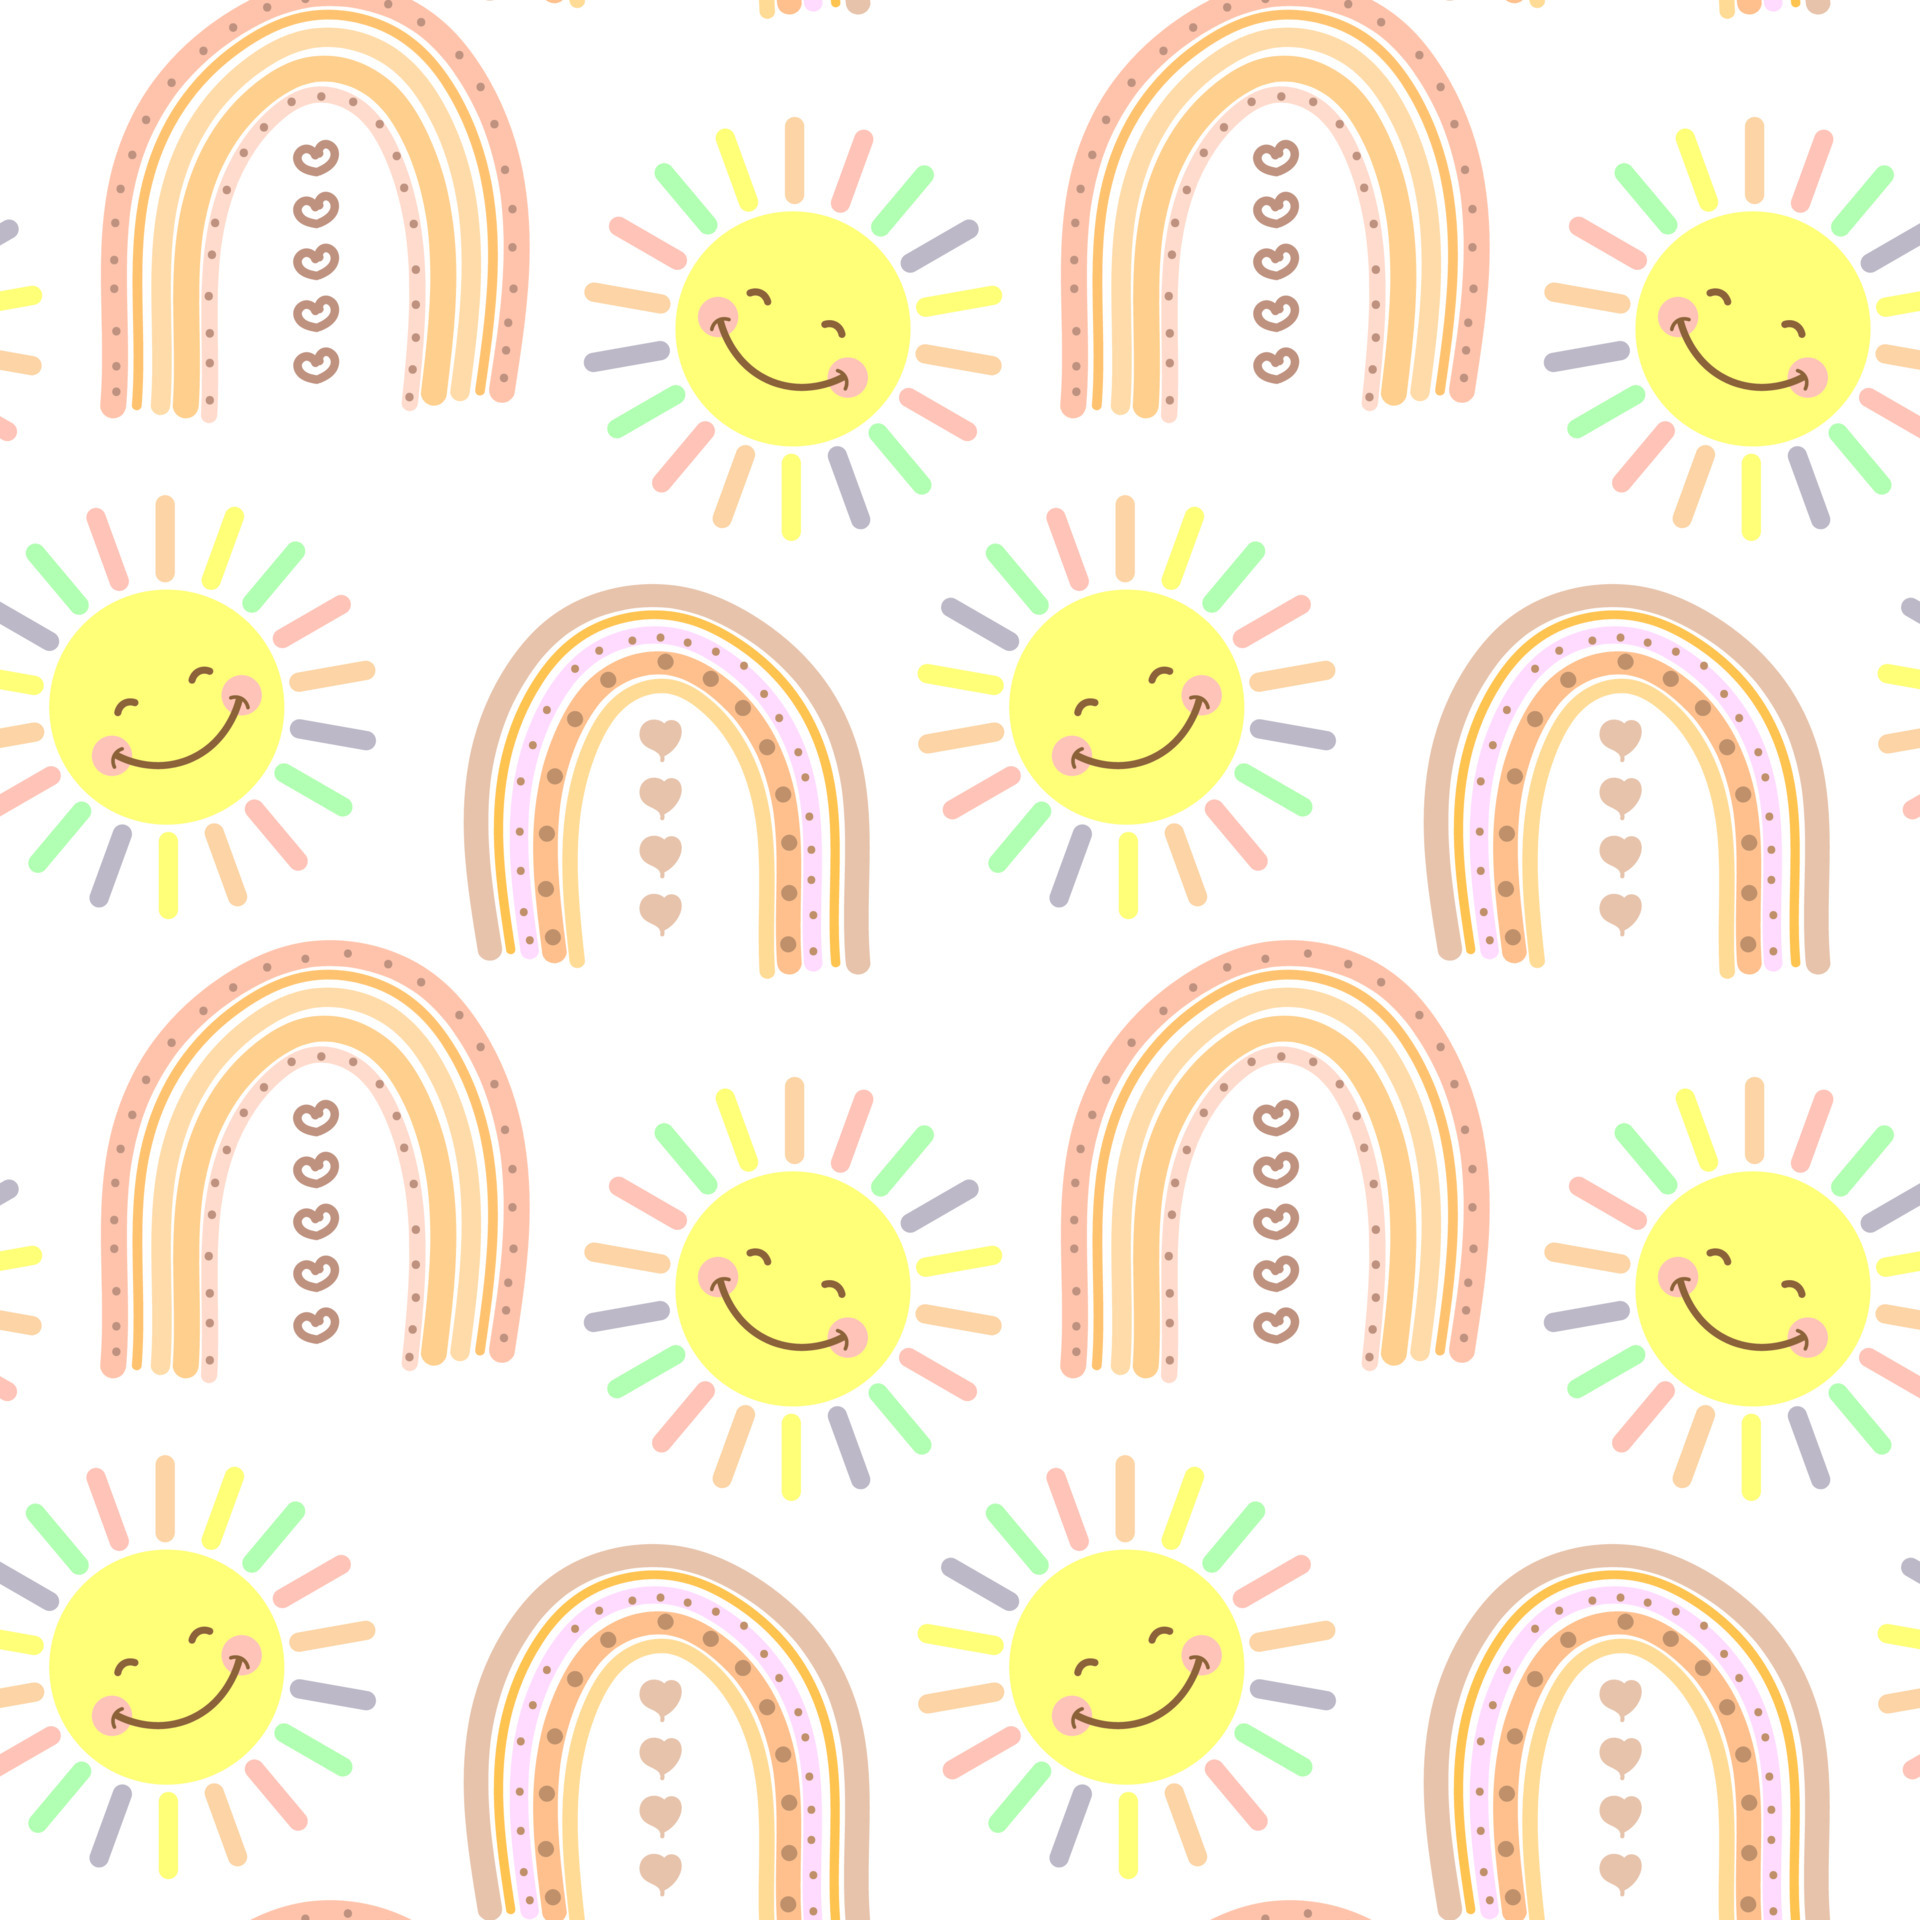 Summer background for children, cute smiling sun and multicolored rainbows. Doodle illustration for print, textile, wallpaper, children's bedroom decor